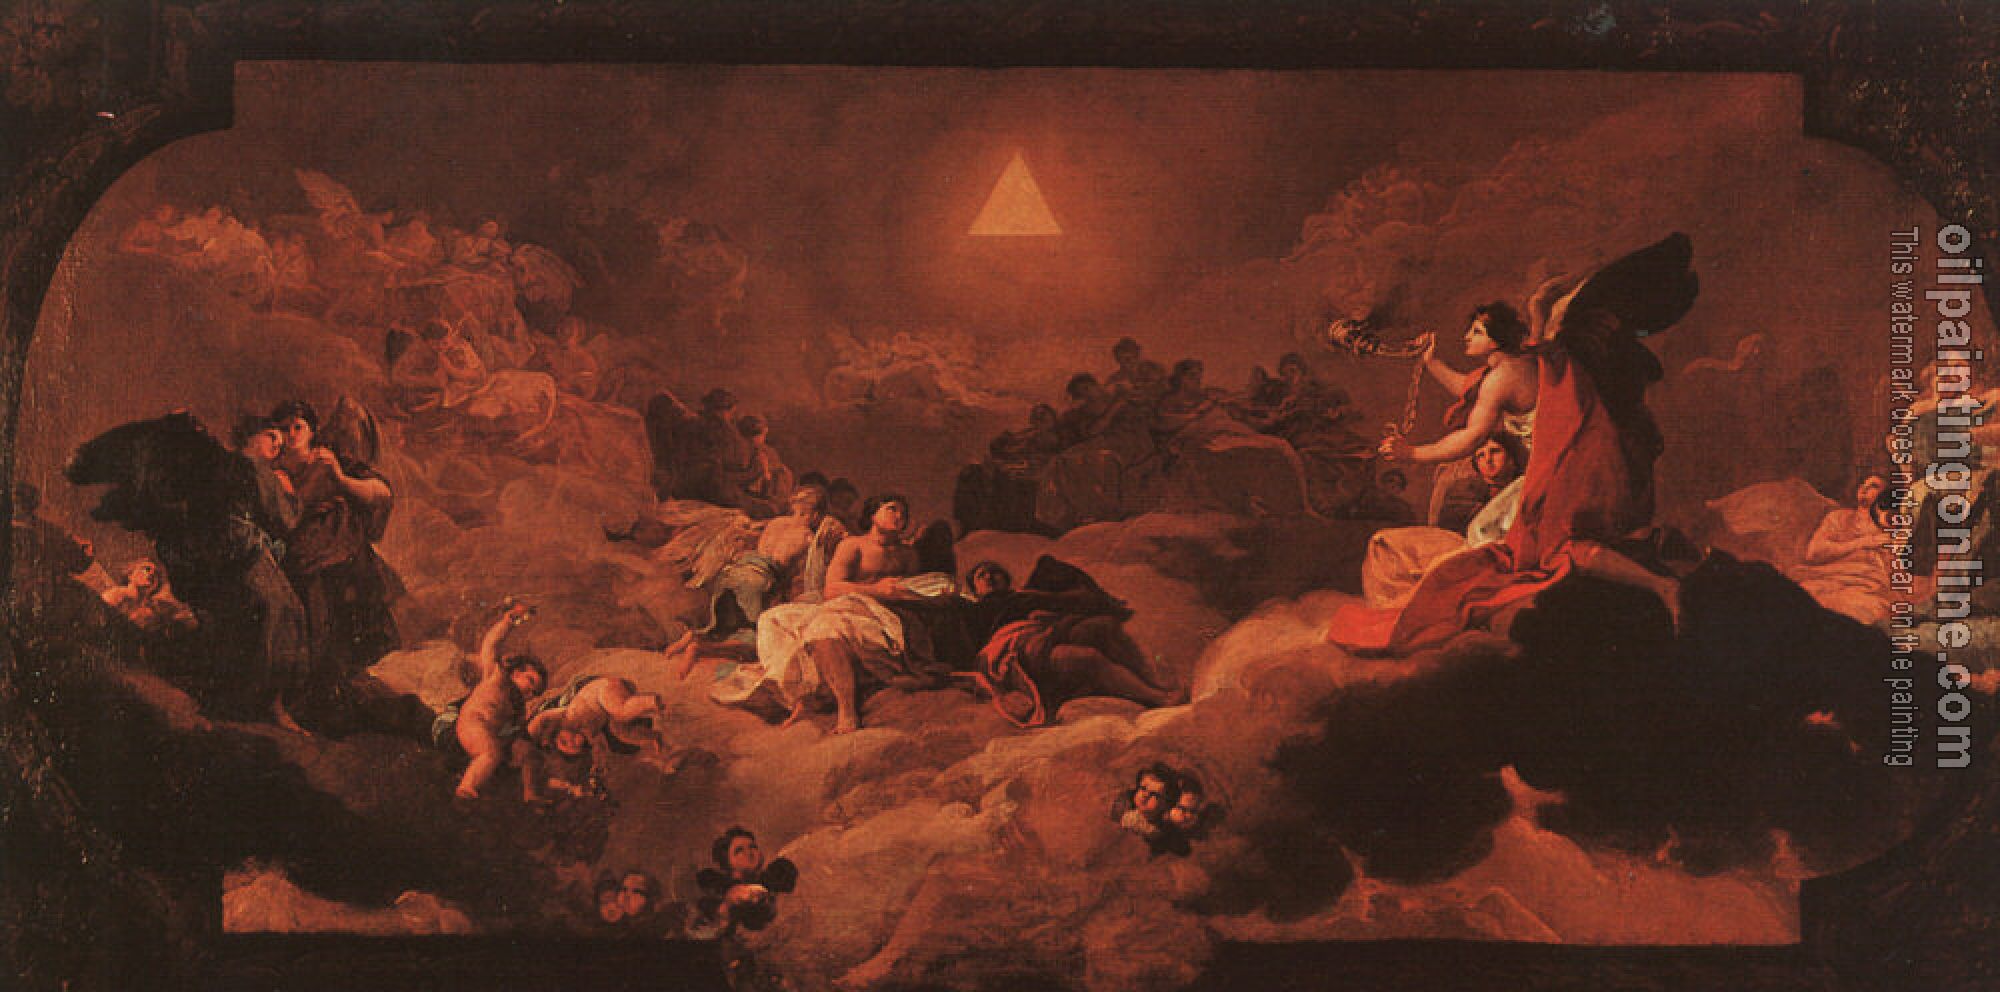 Goya, Francisco de - The Adoration of the Name of The Lord